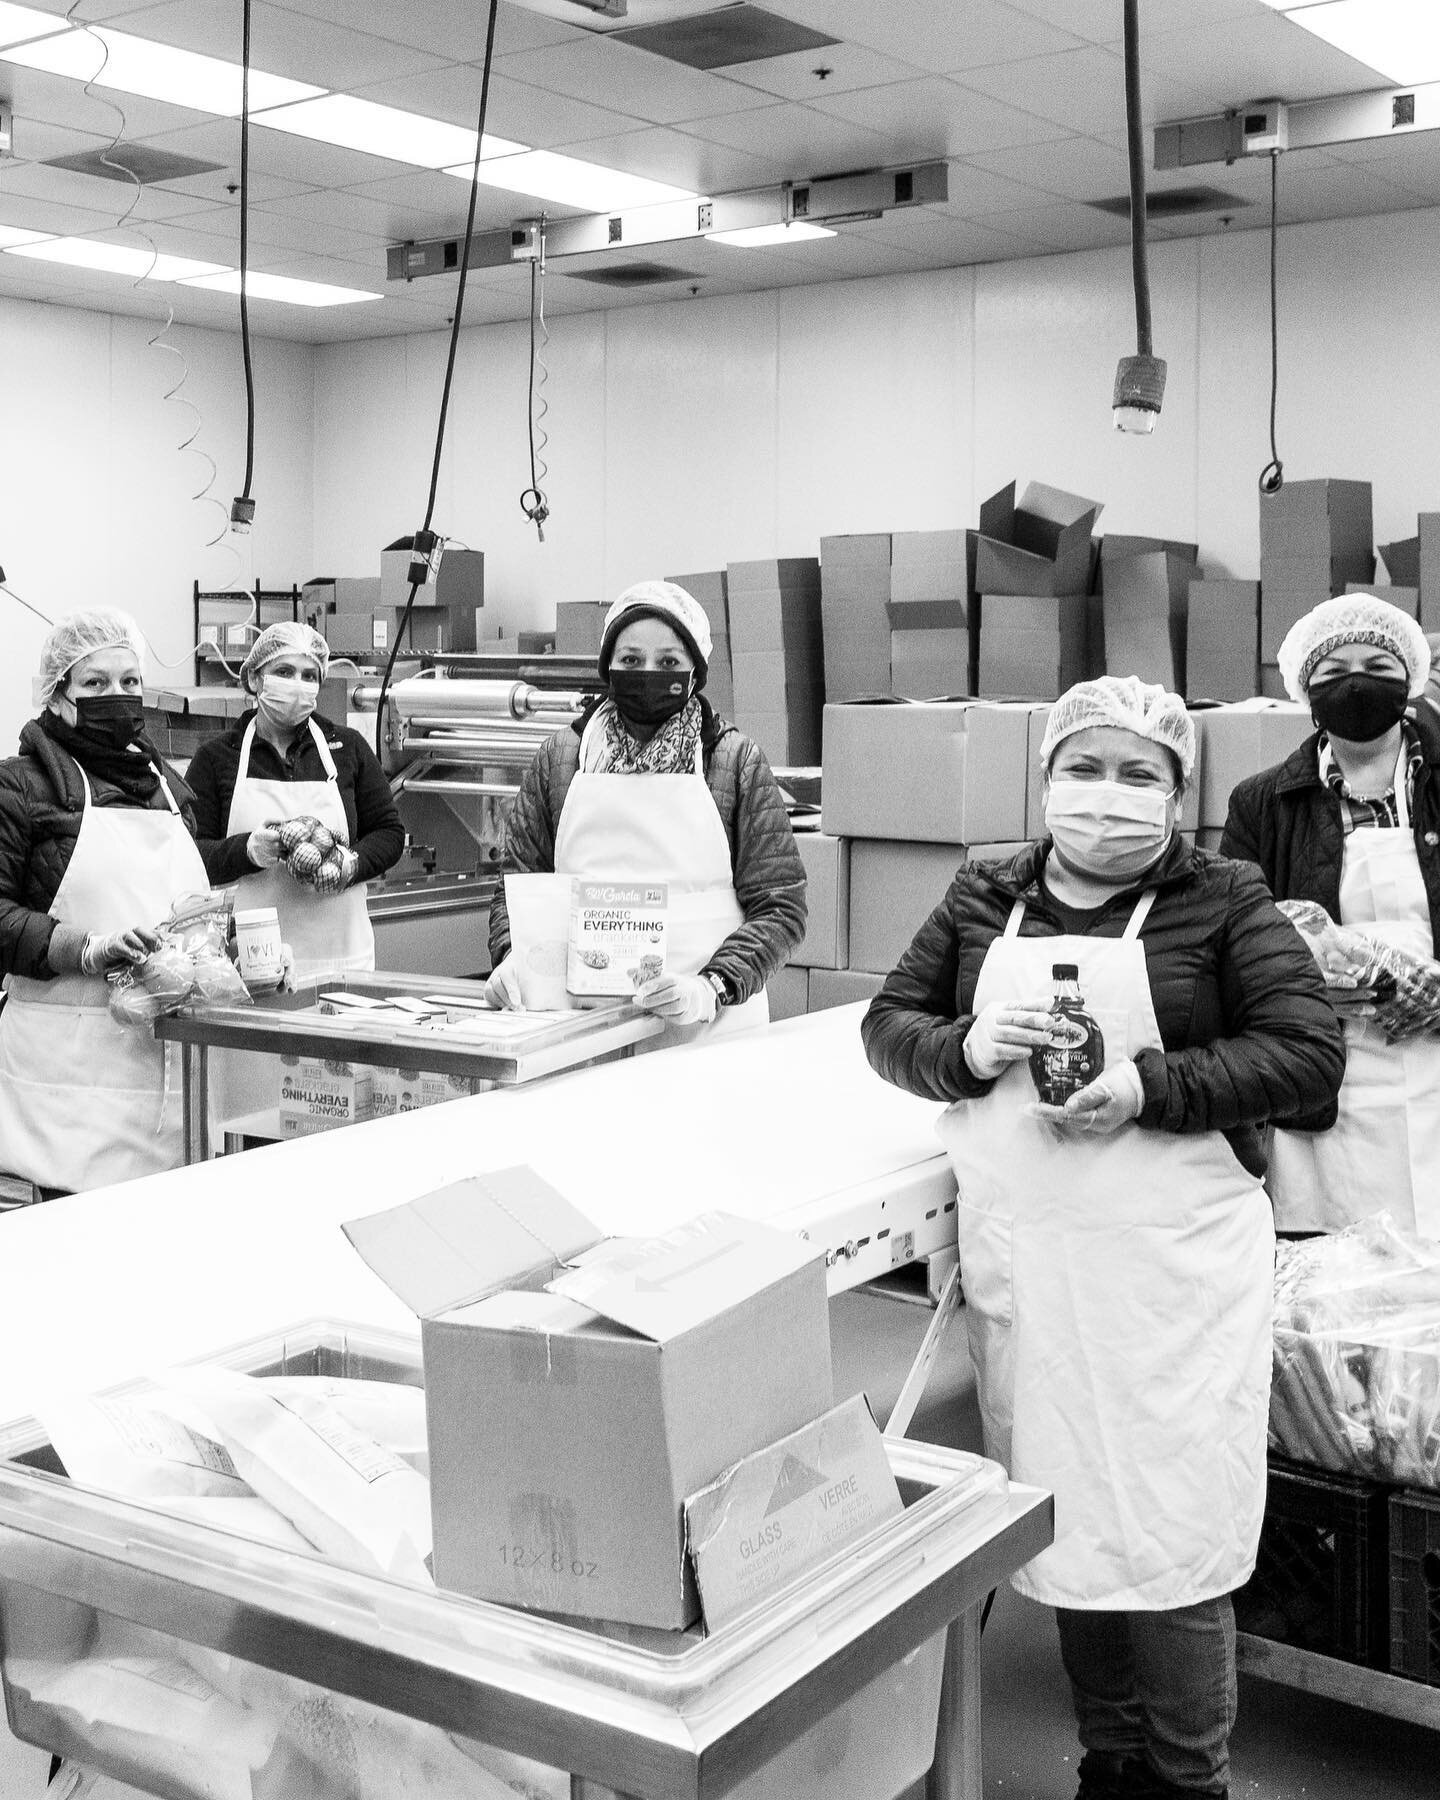 How a school district and an extended community has come together to provide 21,000 children food throughout the pandemic&mdash;and as of last week, transitioned to 100% organic, locally sourced food. Here&rsquo;s just some of the people making this 